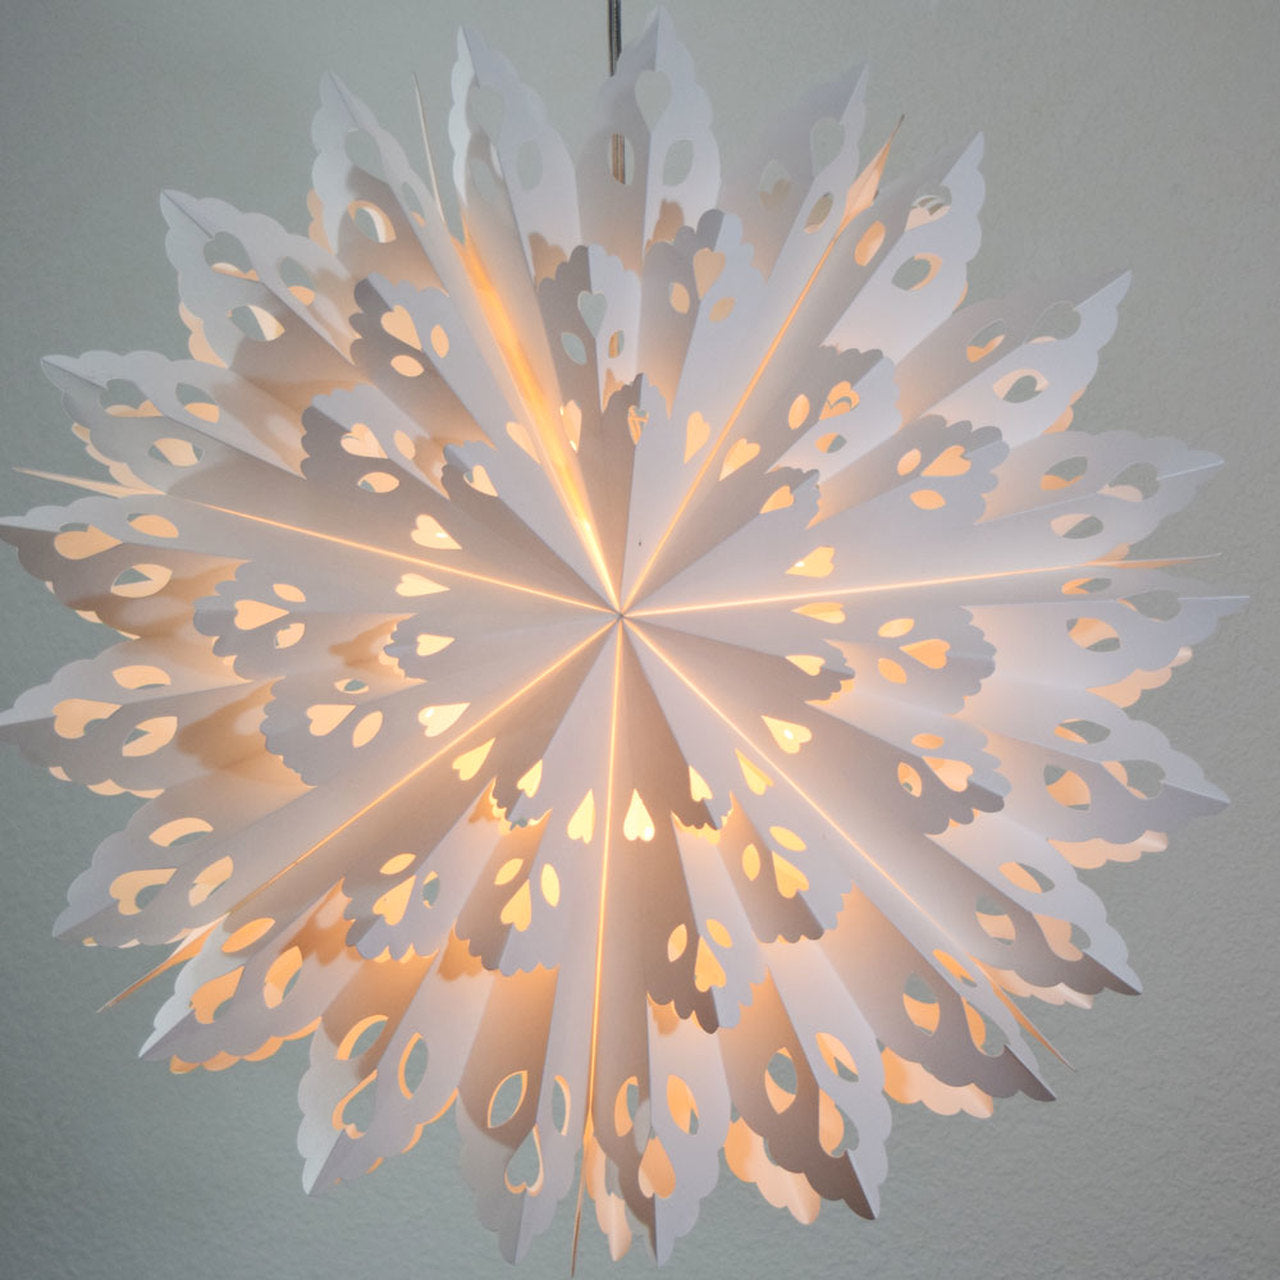 3-PACK + Cord | White Winter Wreath 32" Pizzelle Designer Illuminated Paper Star Lanterns and Lamp Cord Hanging Decorations - PaperLanternStore.com - Paper Lanterns, Decor, Party Lights & More